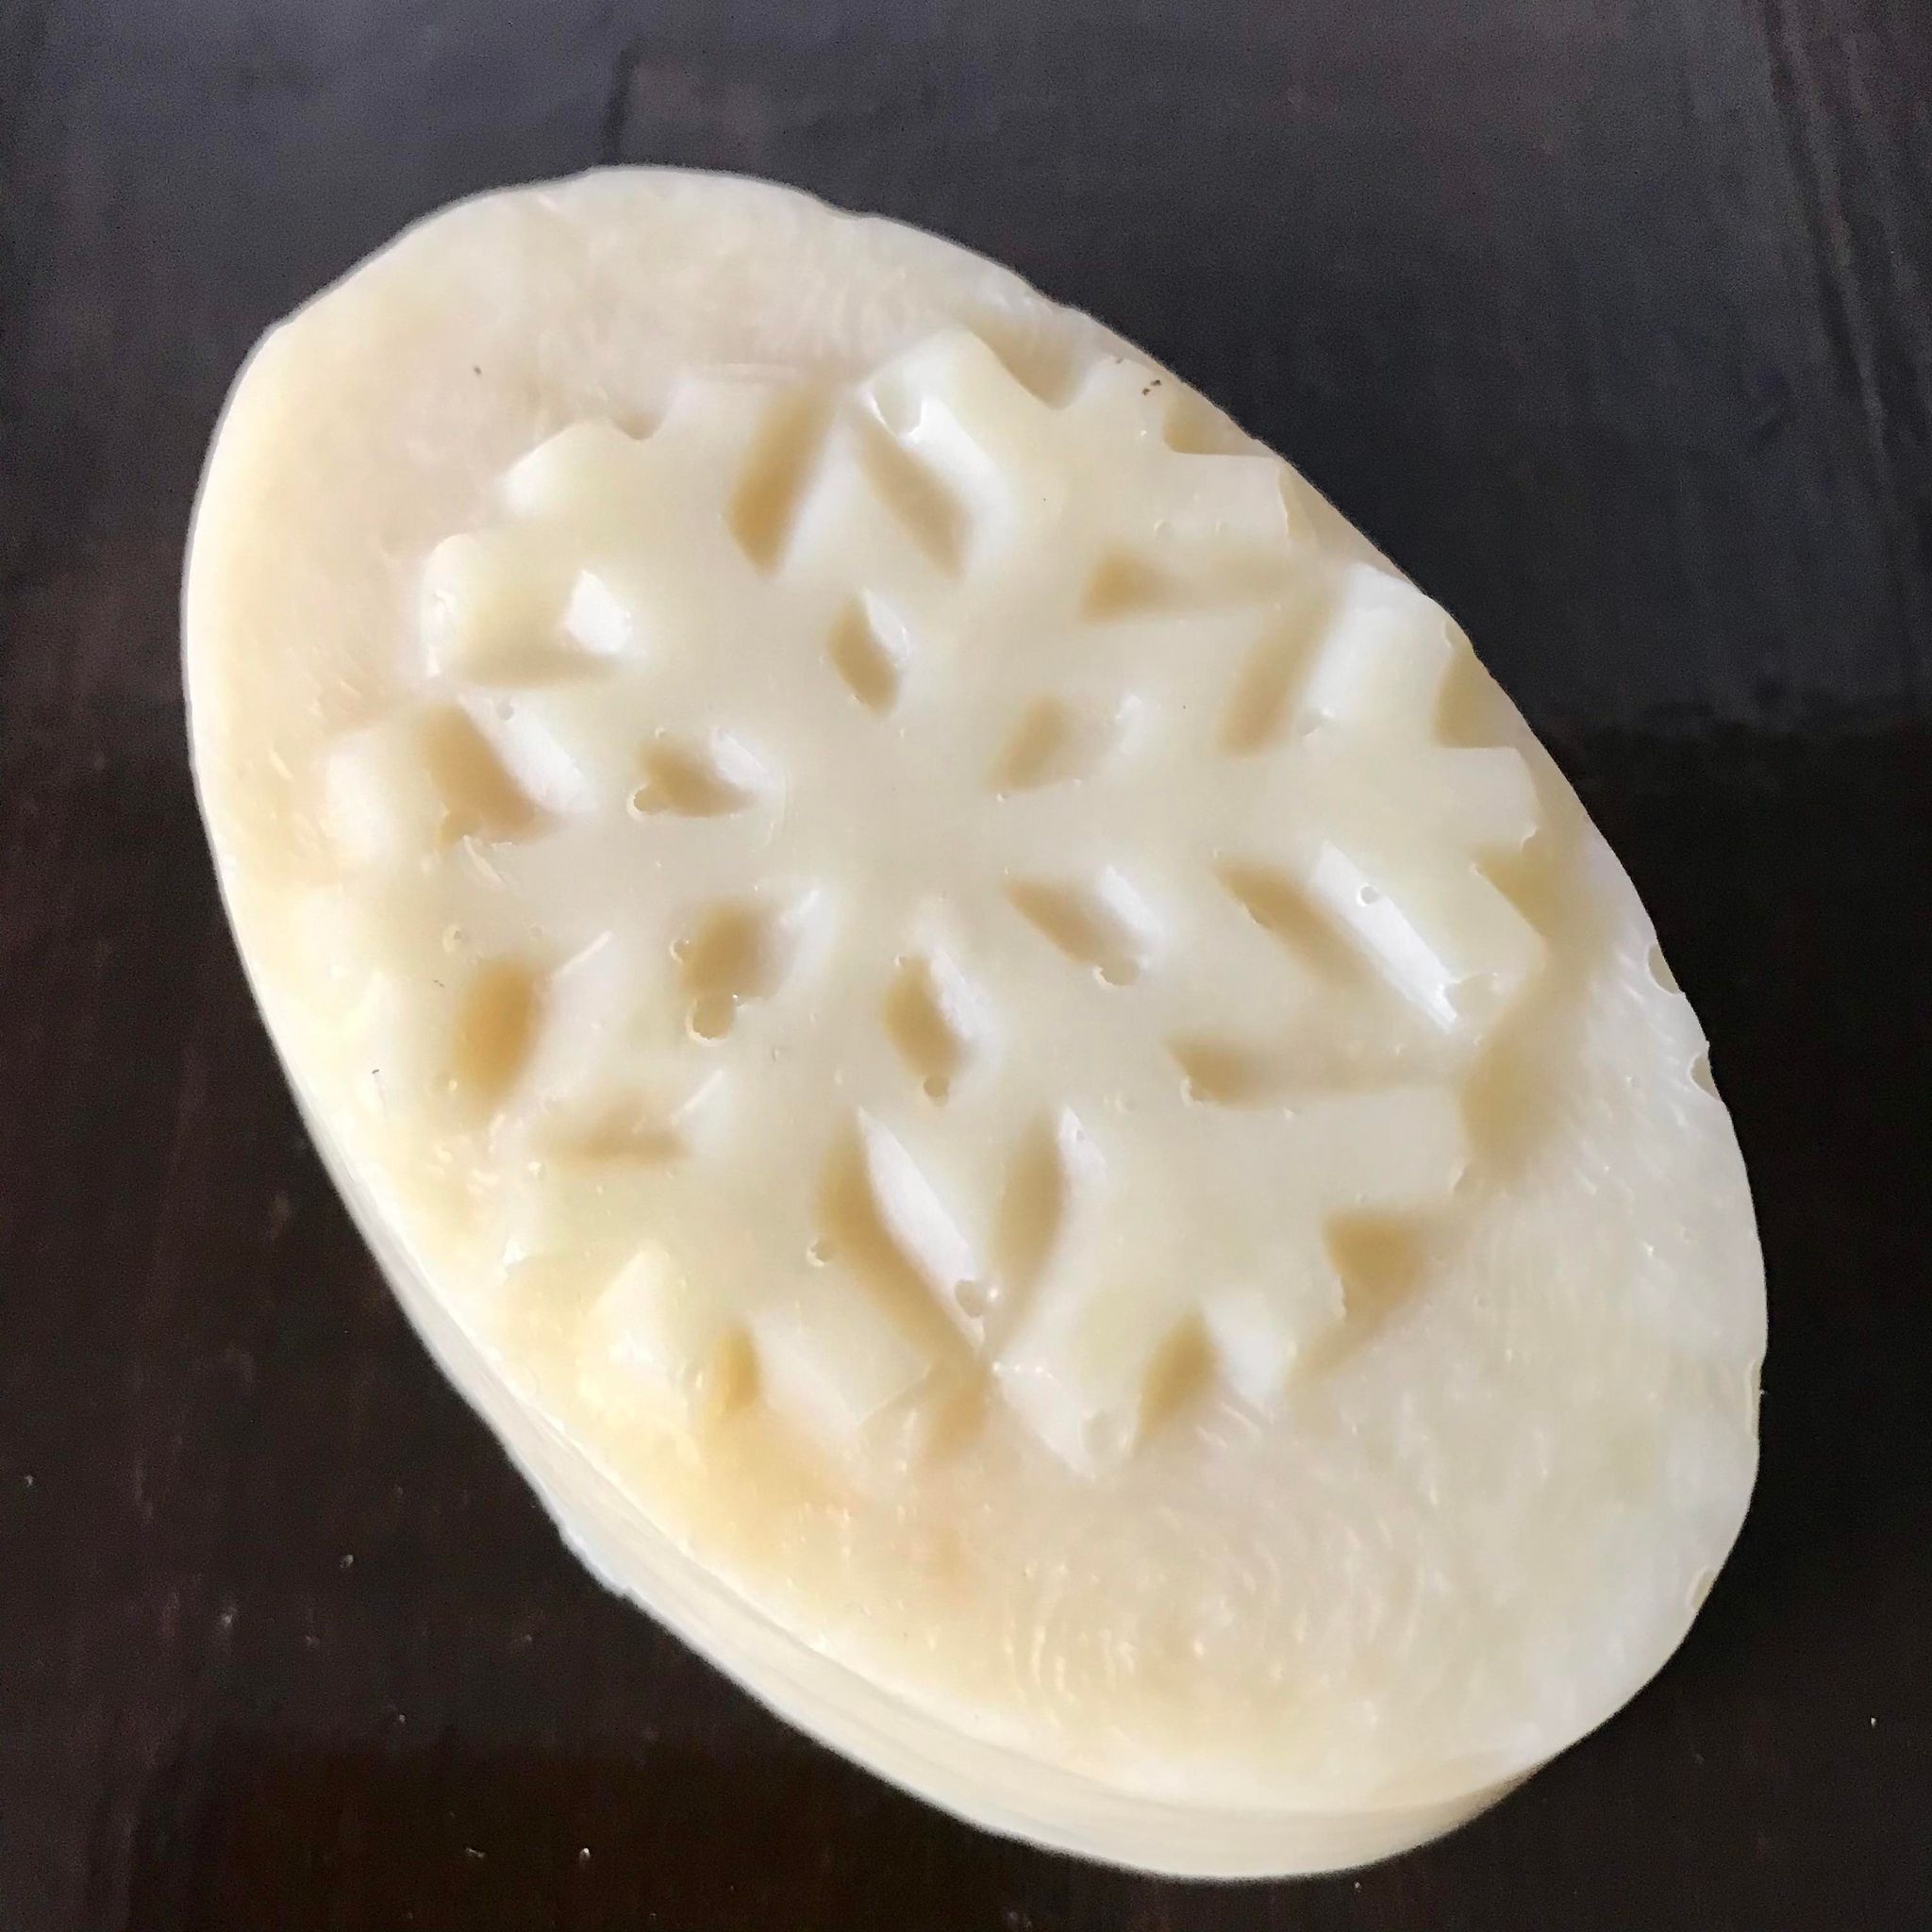 unpackaged oval snowflake soap made in canada by simply natural canada